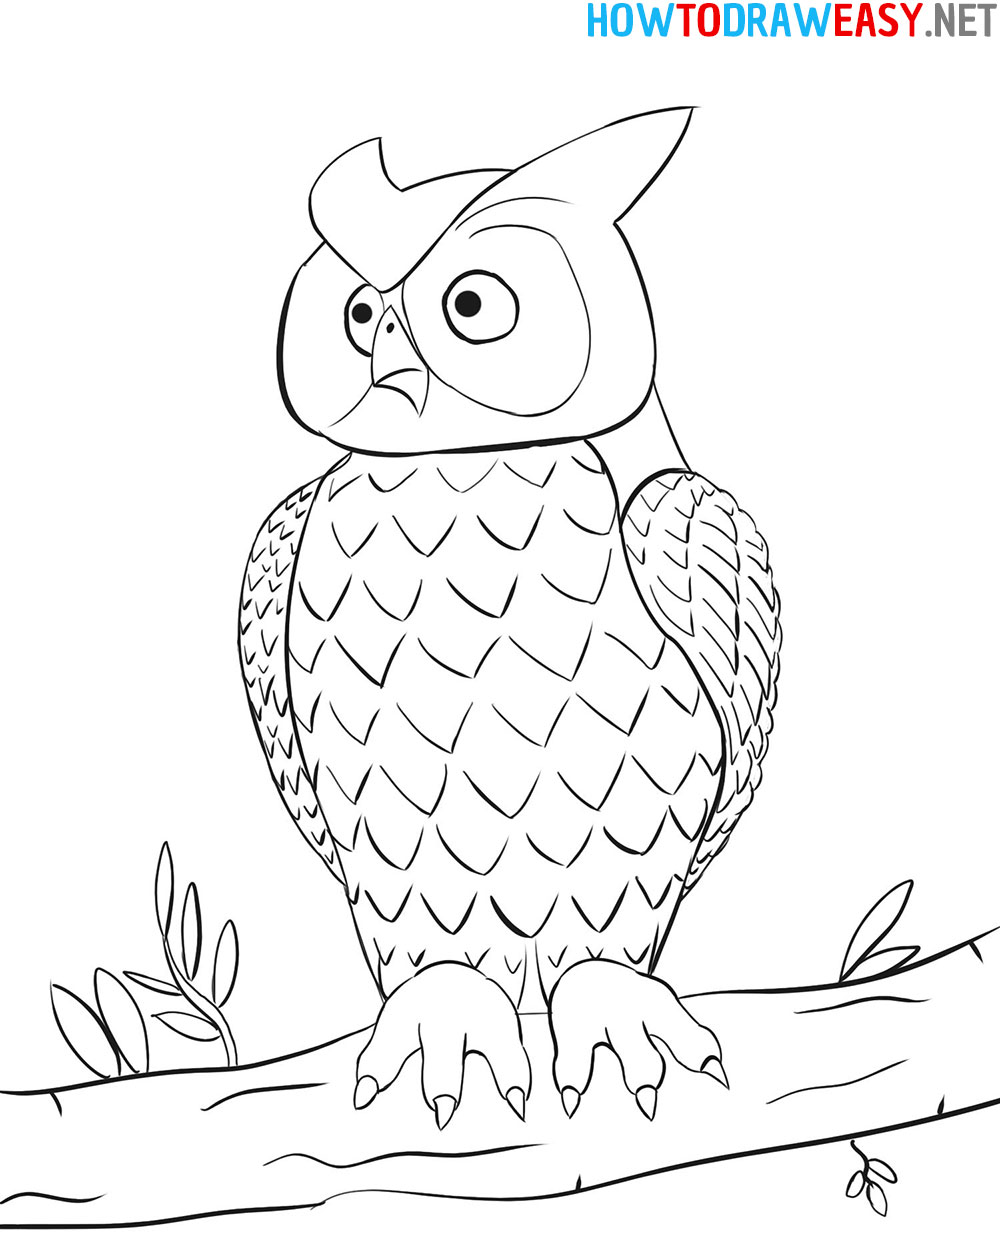 How to Draw an Owl Easy